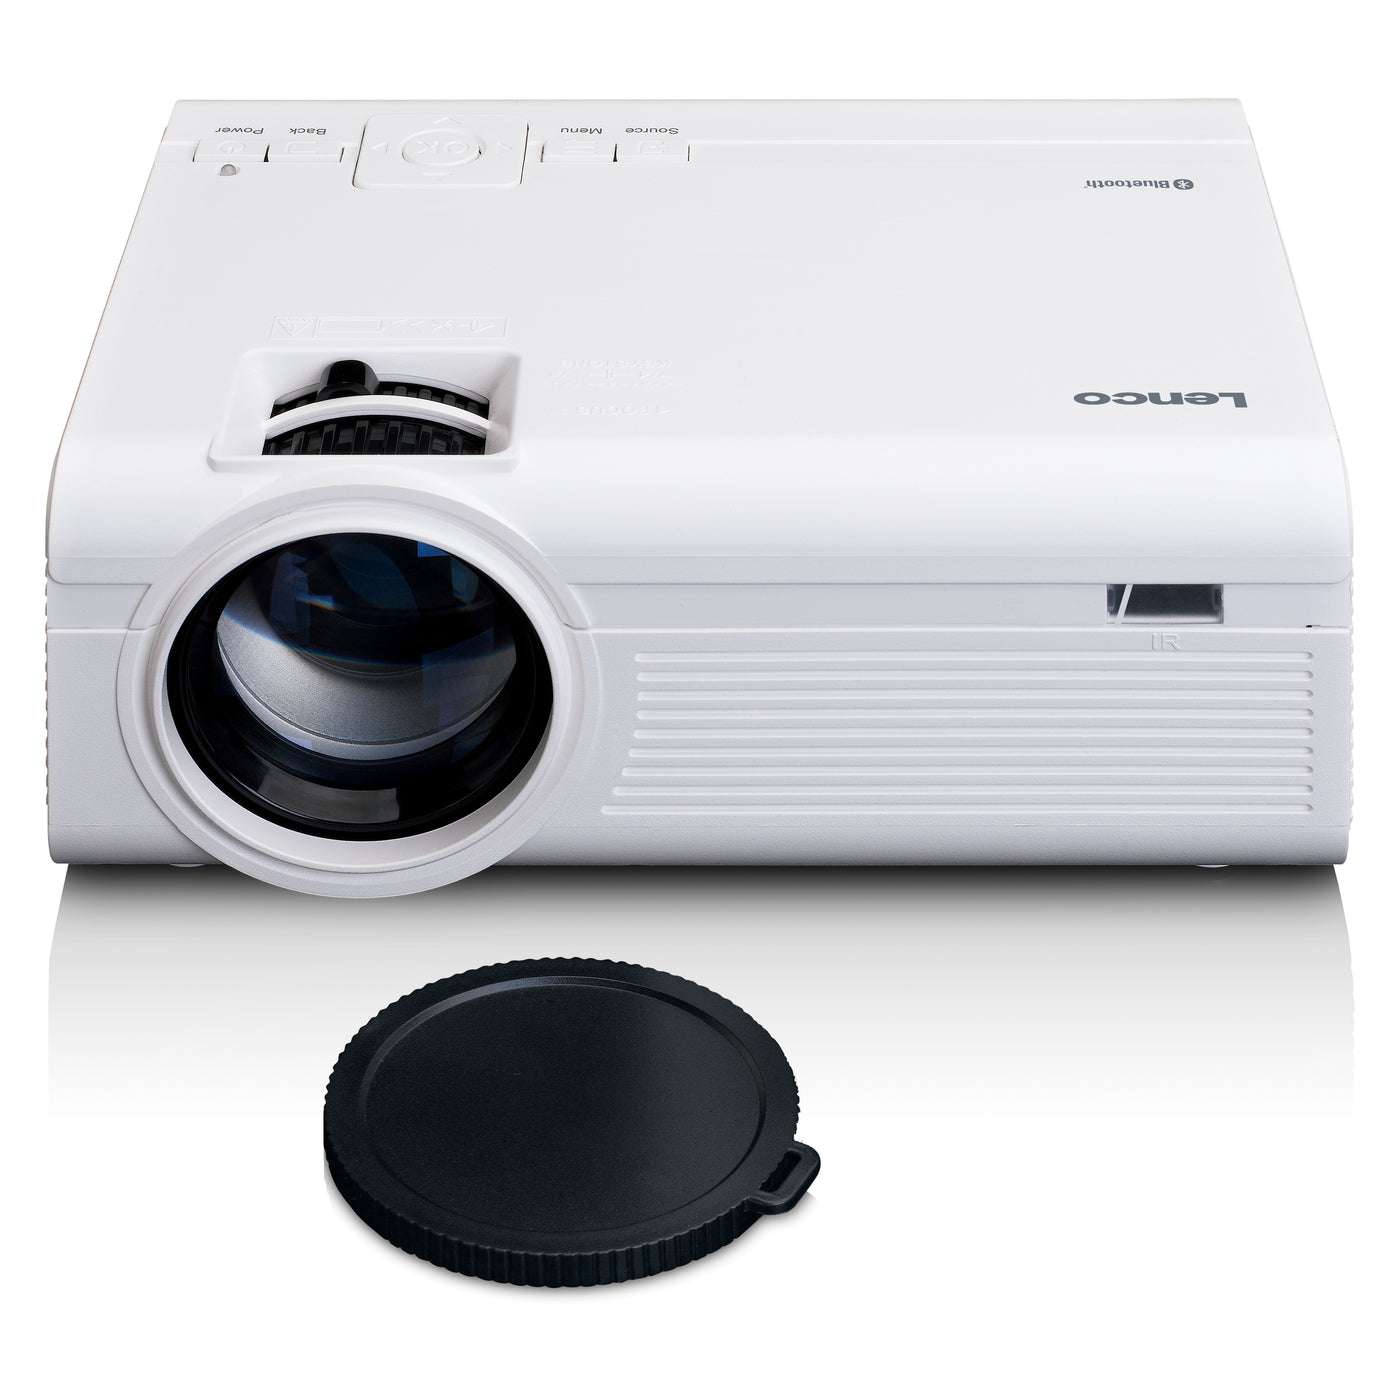 LENCO LPJ-300WH - LCD Projector met Bluetooth® - Wit